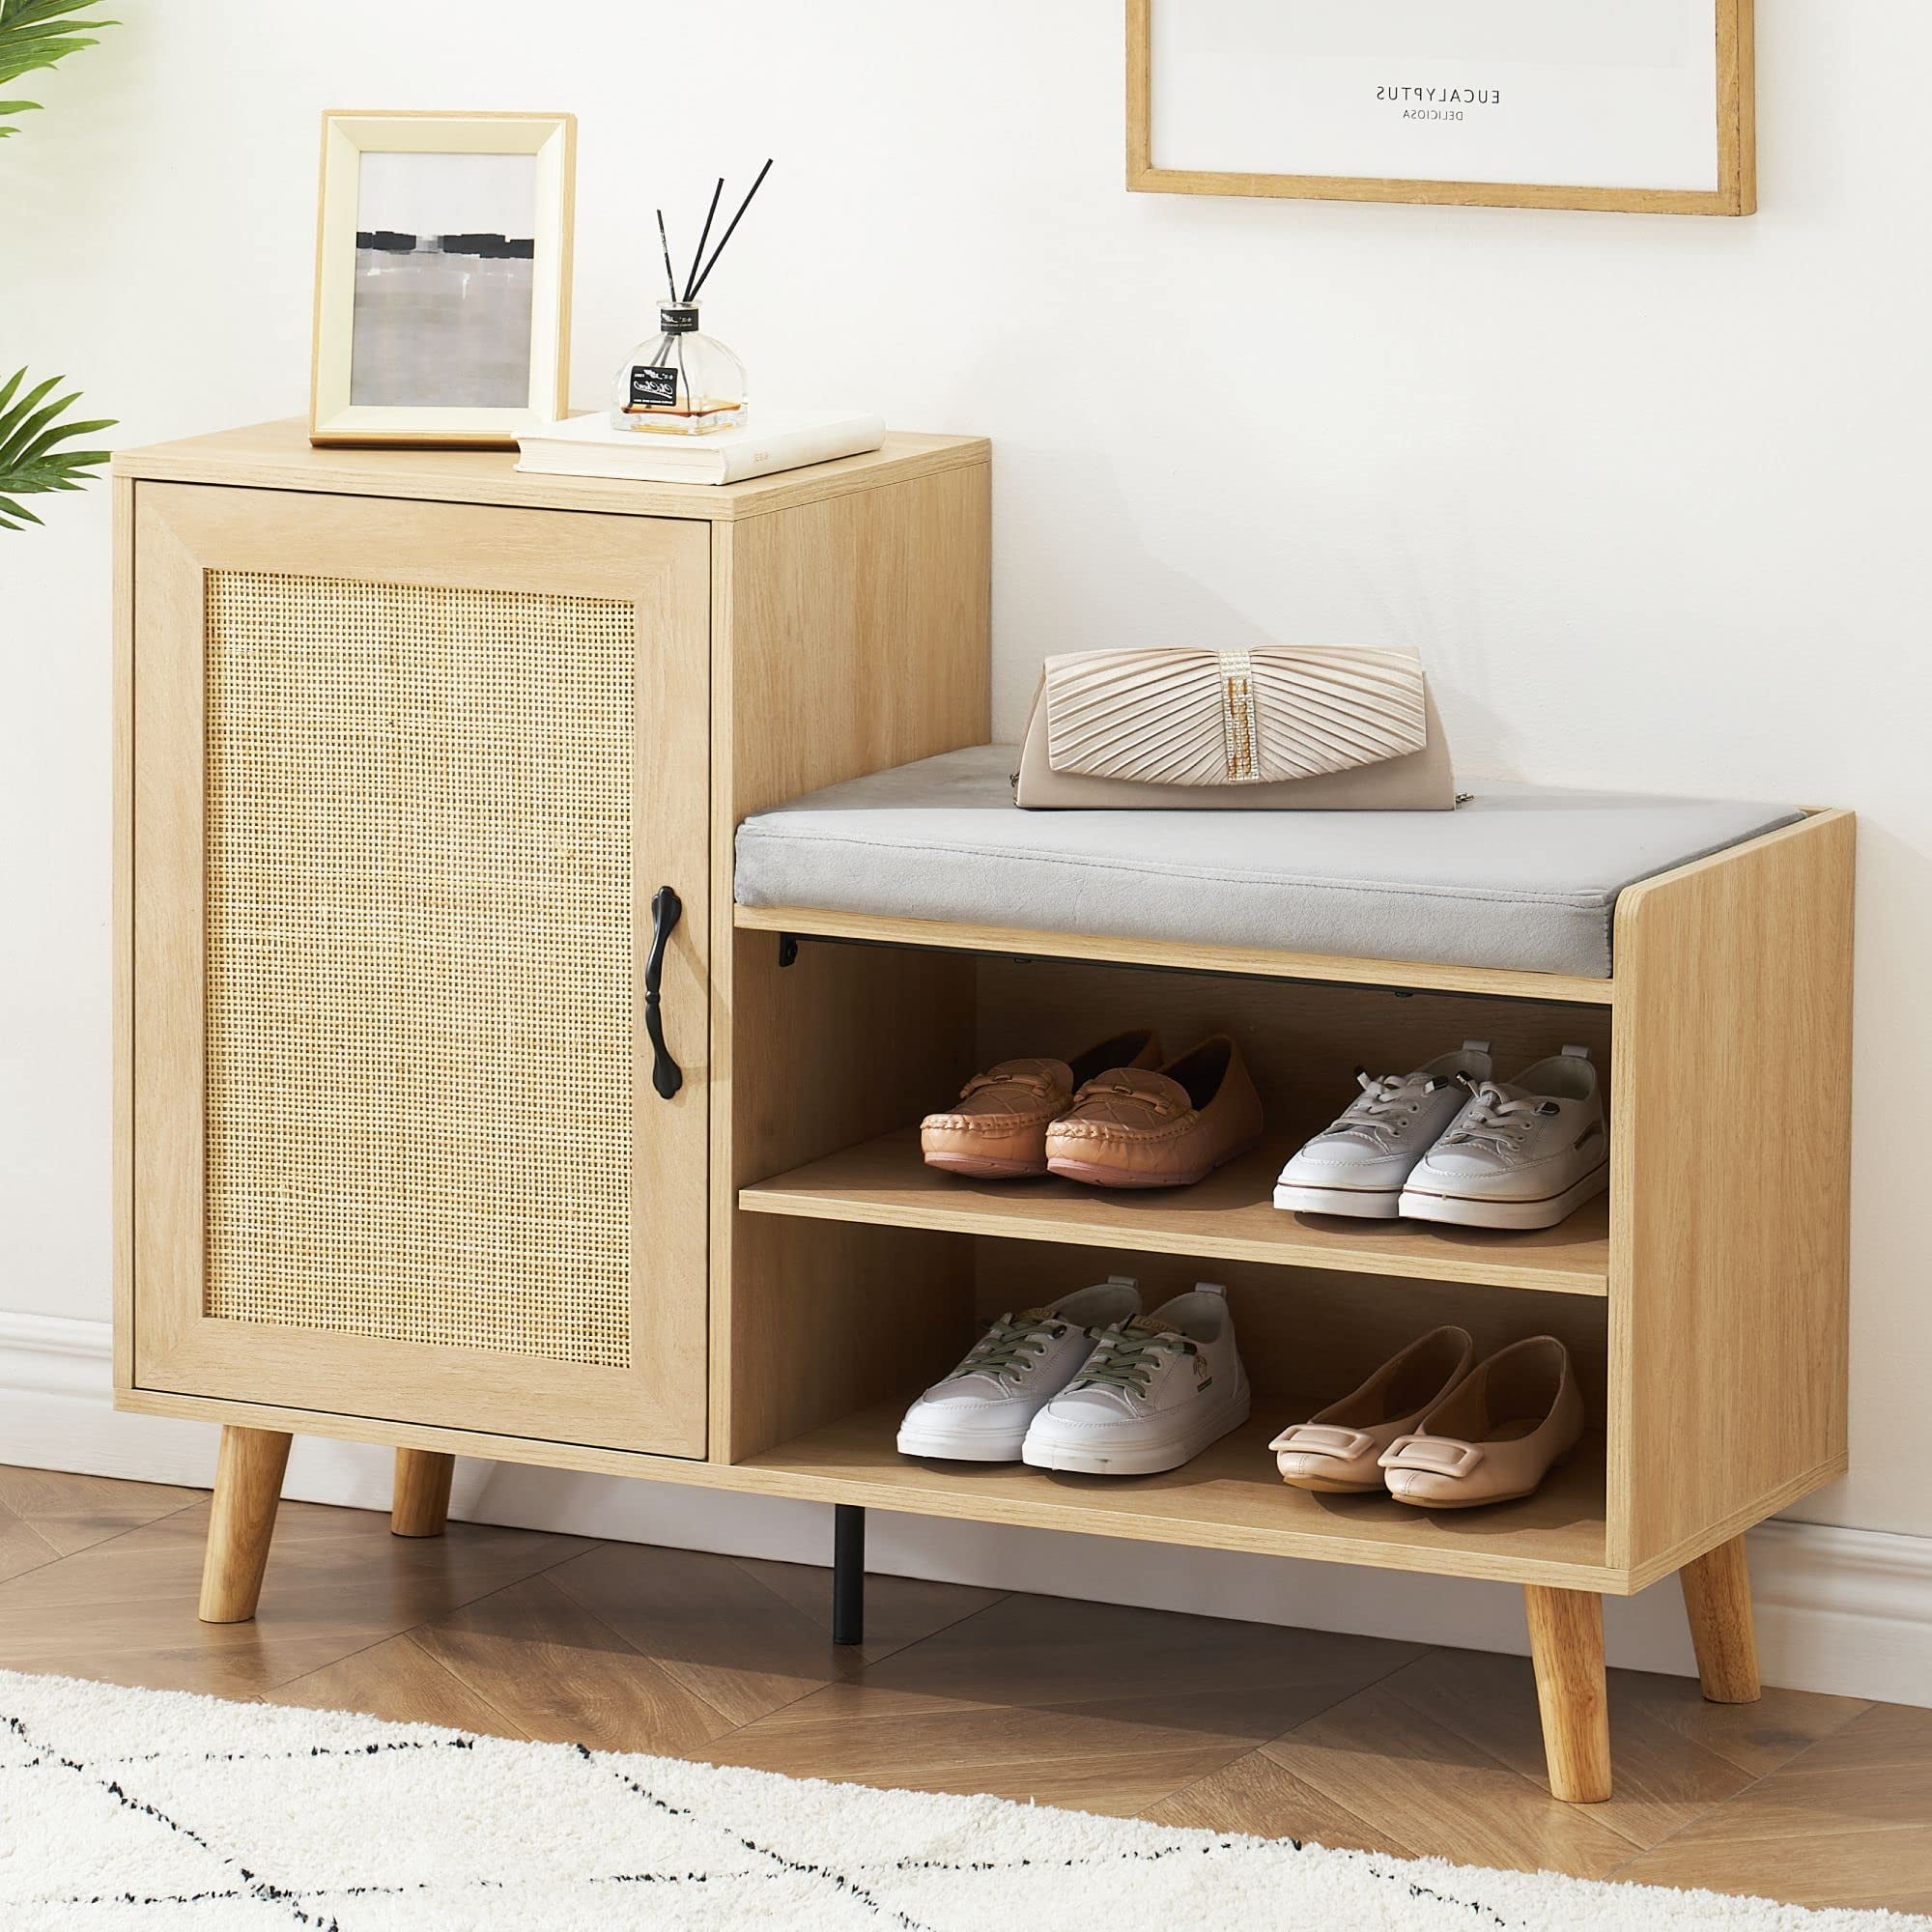 IDEALHOUSE 2-in-1 Shoe Storage Bench, Natural Rattan Shoe Cabinets with 3  Adjustable Shelves, Entryway Bench with Removable Seat Cushion, Shoe Rack